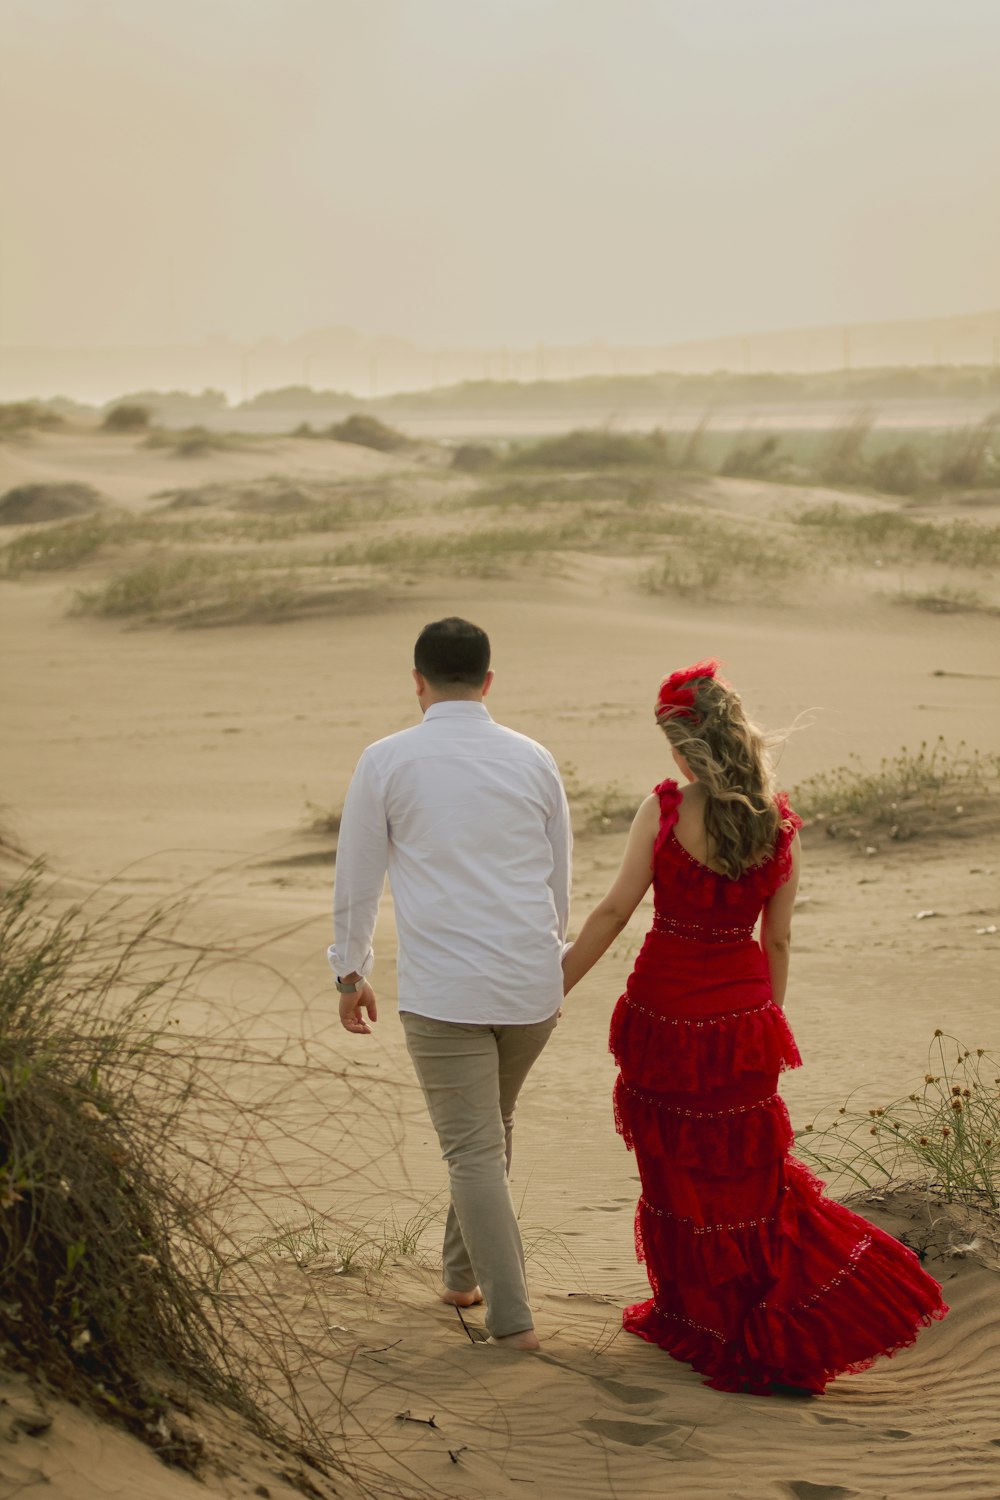 a man and woman walking on a sandy beach